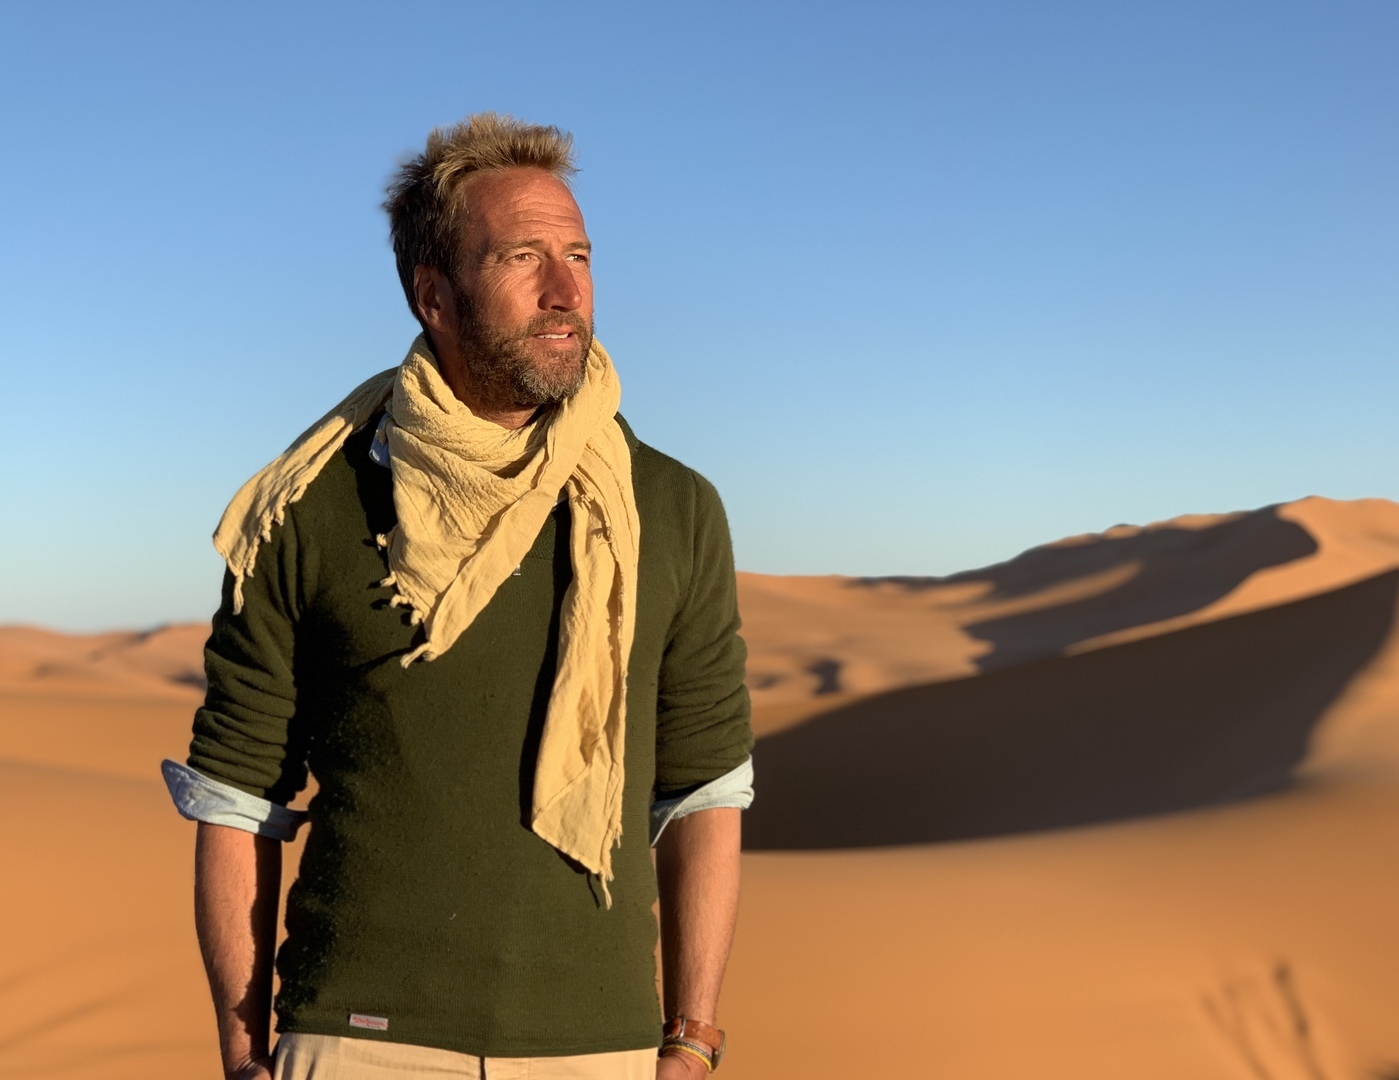 Ben Fogle: Tales from the Wilderness, Southend-on-Sea, England, United Kingdom